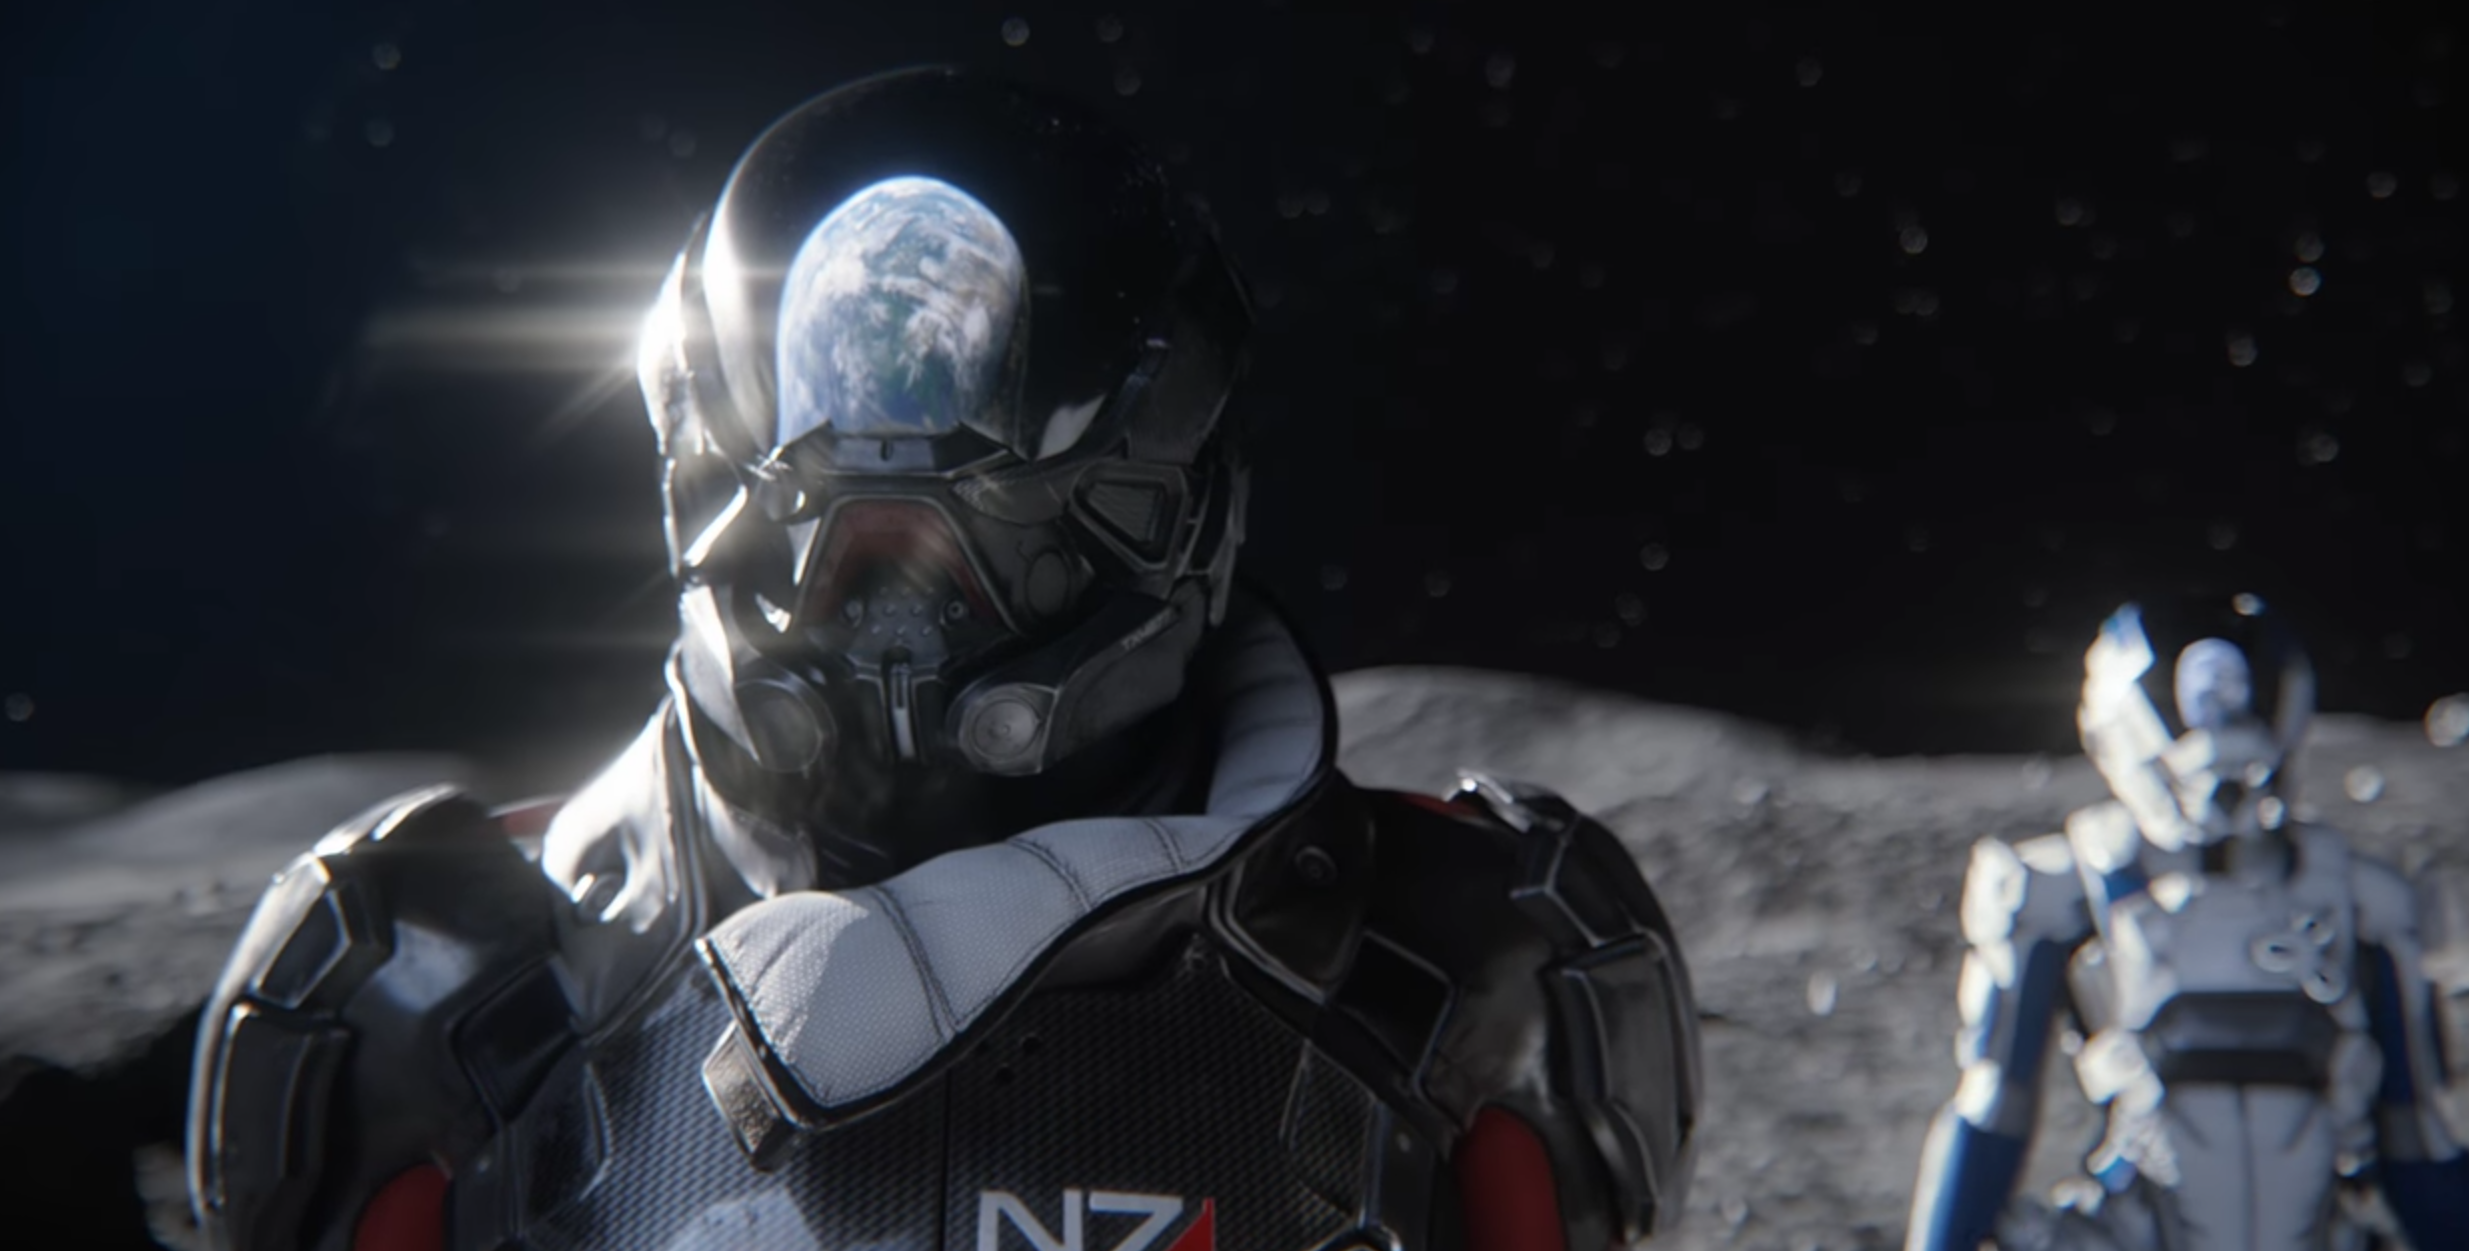 chequea-trailer-mass-effect-andromeda-donde-muestra-multiplayer-frikigamers.com